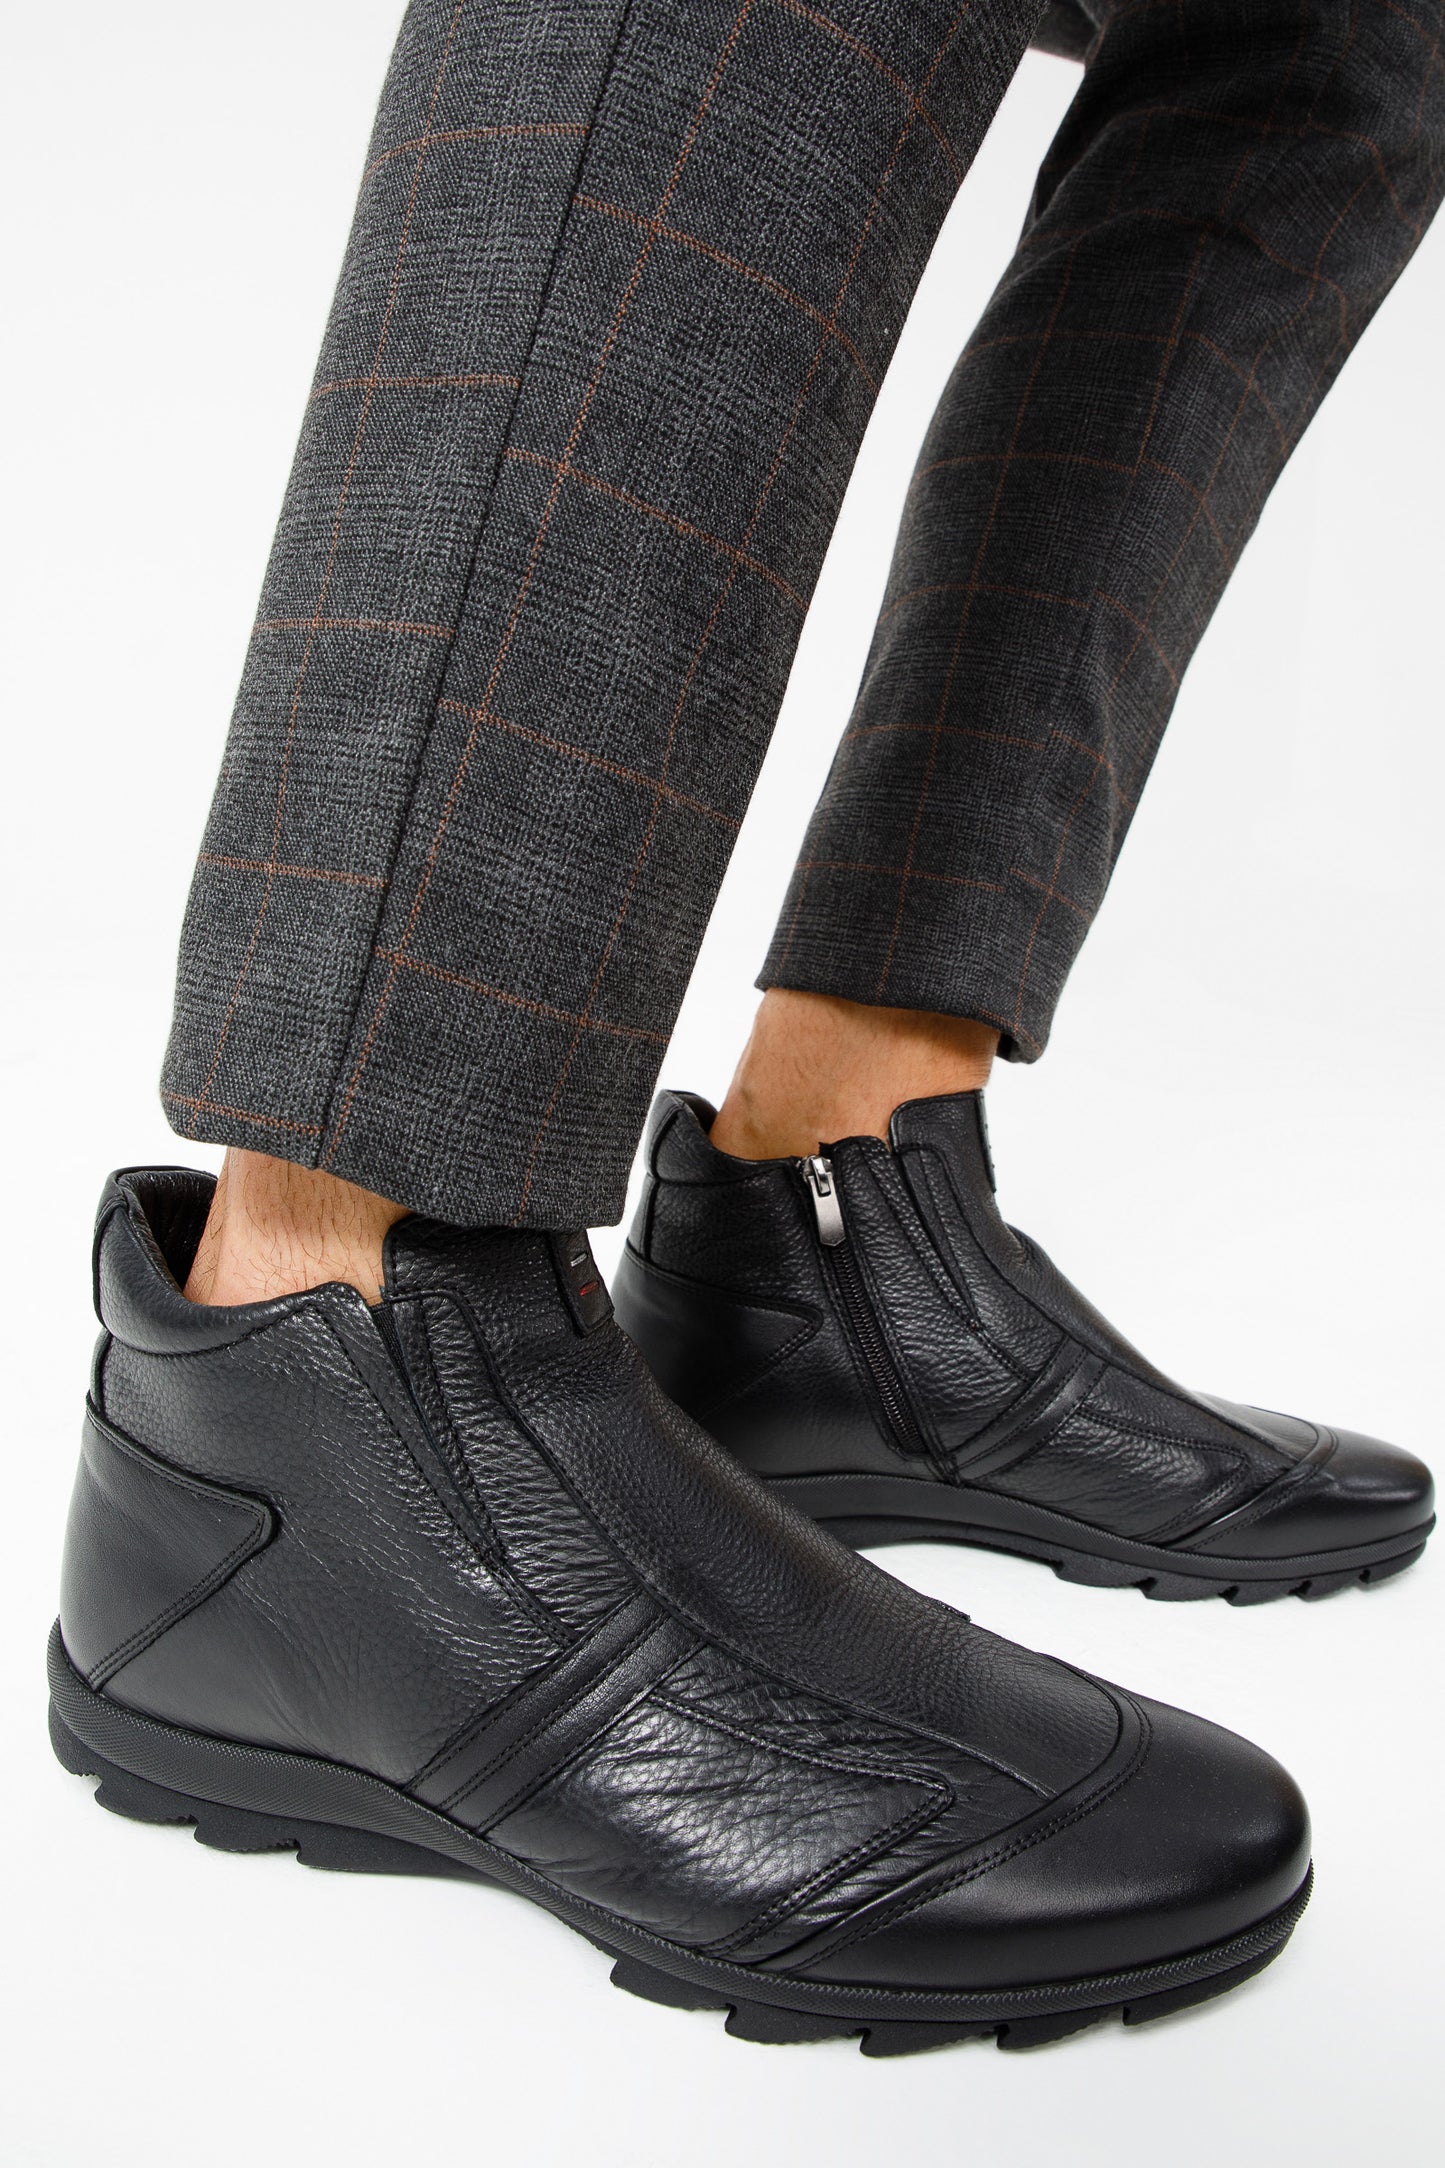 The Montreal Black Leather Casual Zip-Up Ankle Men Boot